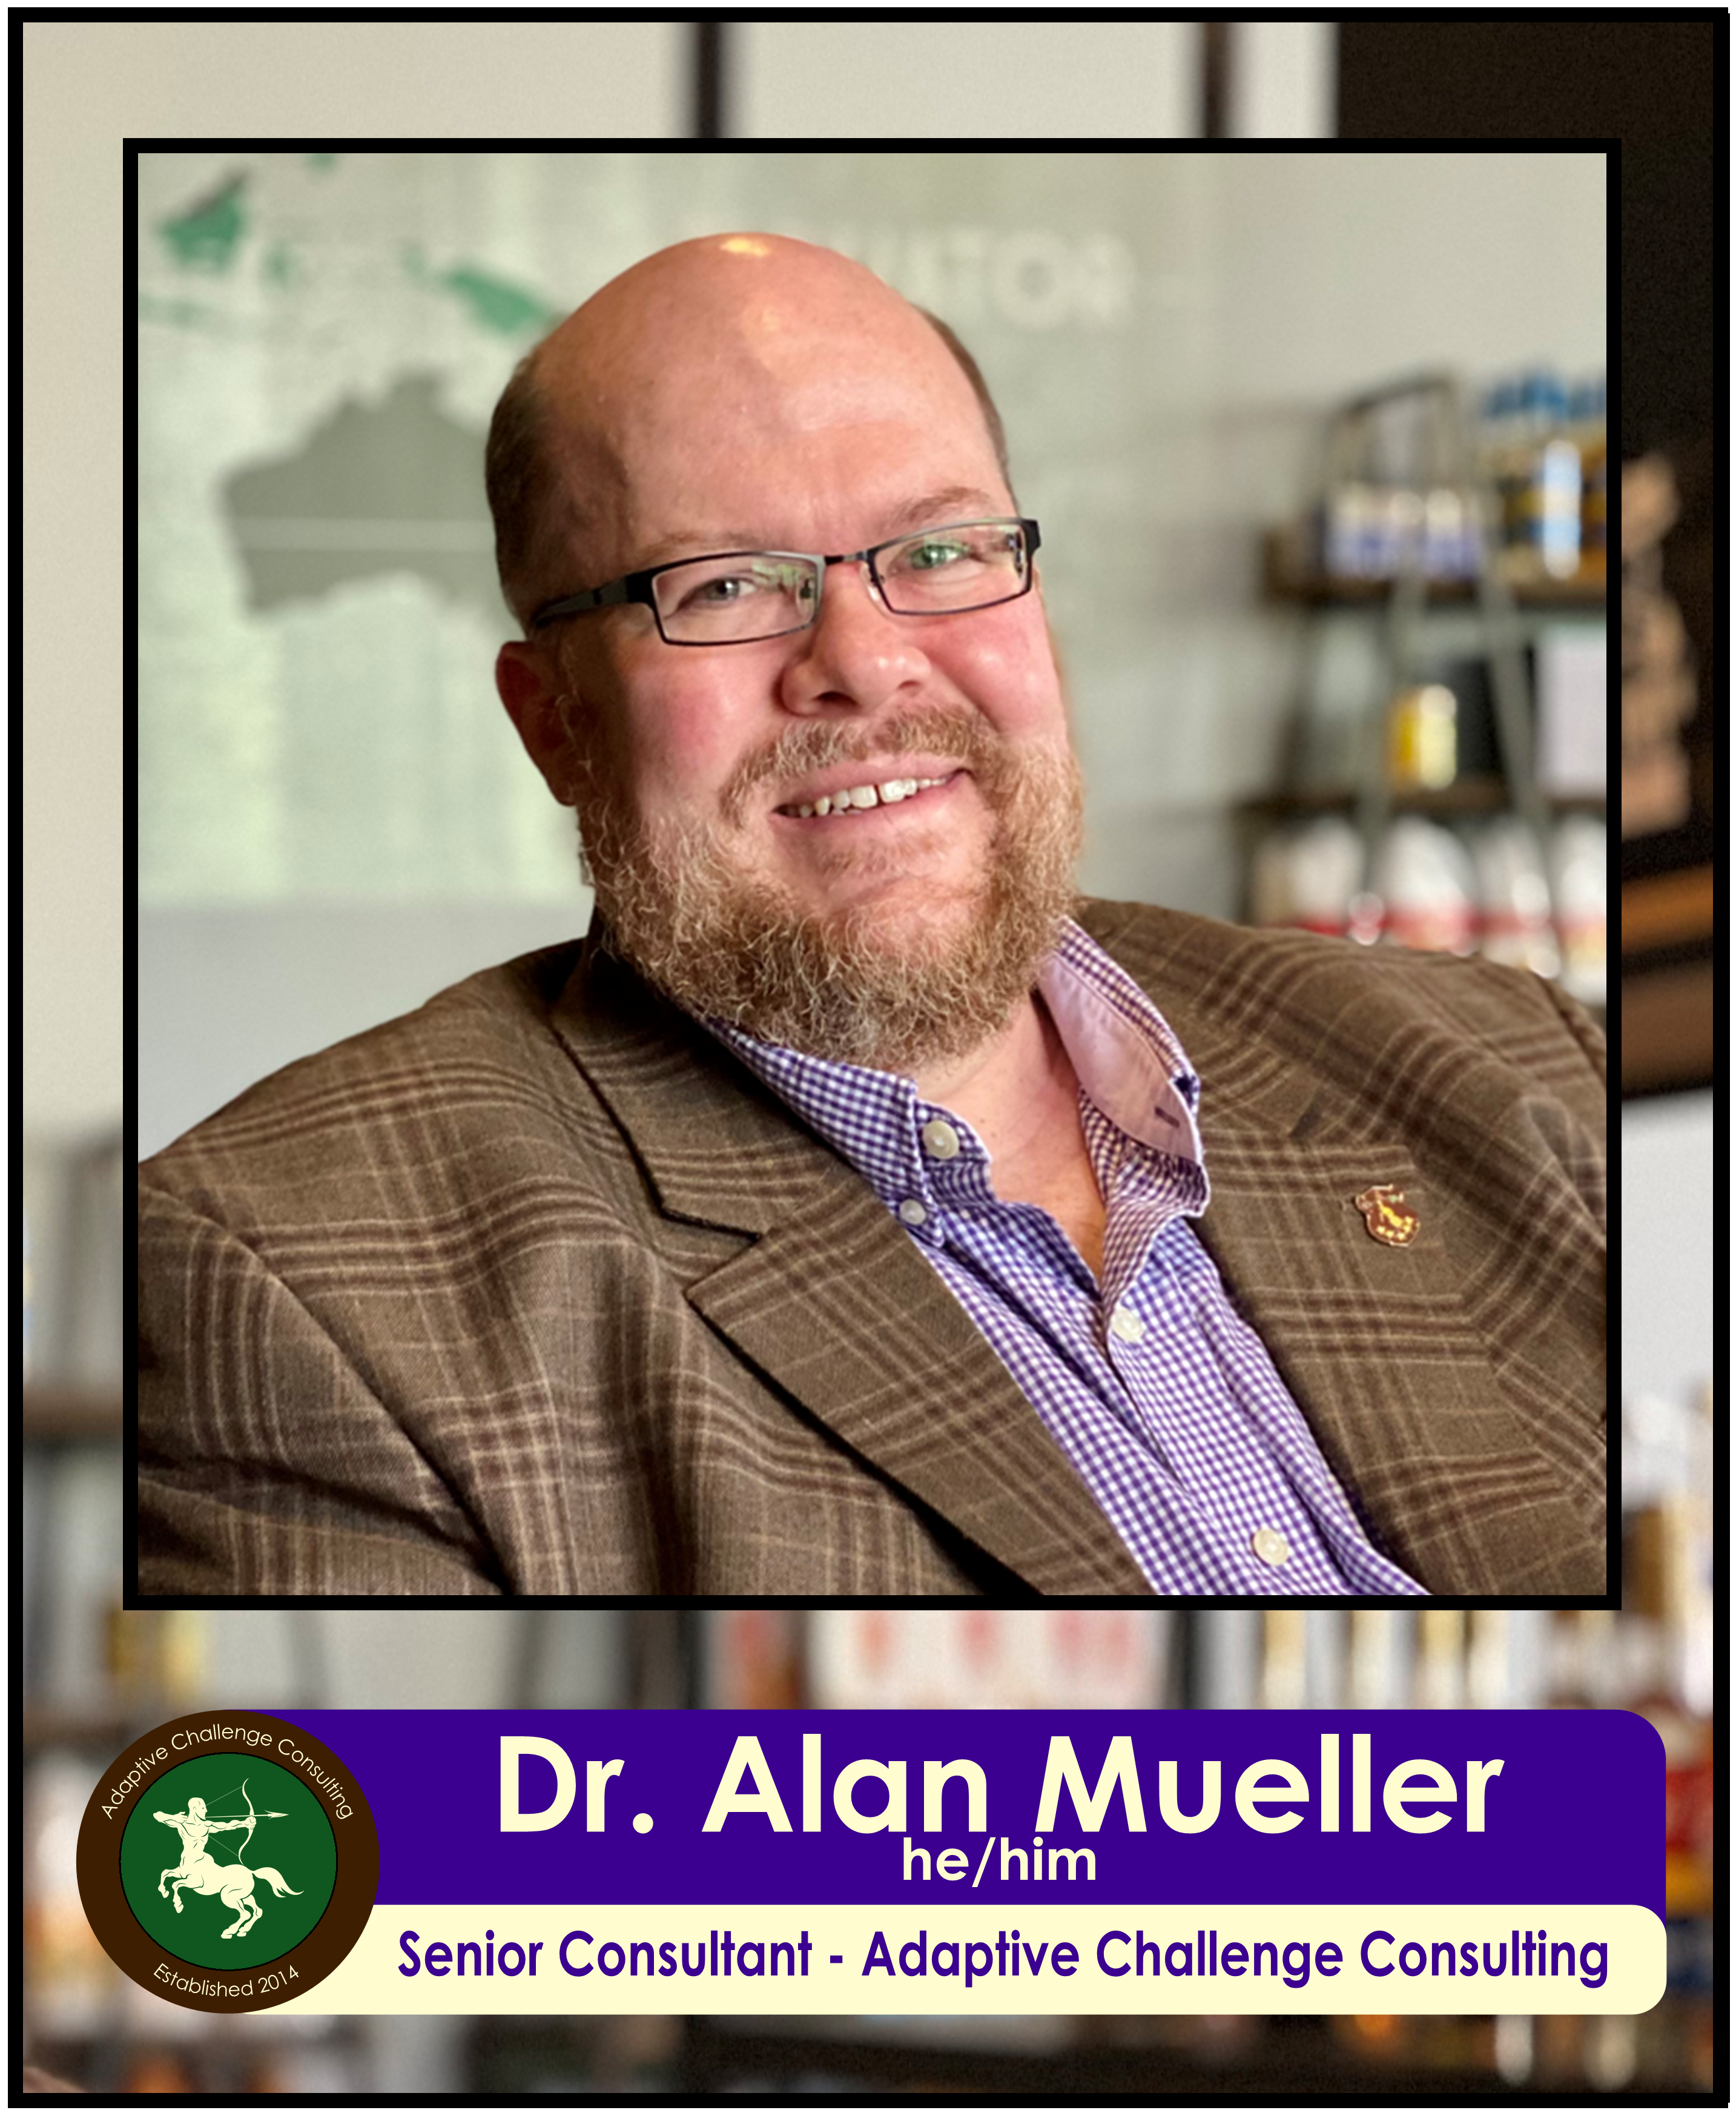 Dr. Alan Mueller (he/him) Senior Consultant - Adaptive Challenge Consulting